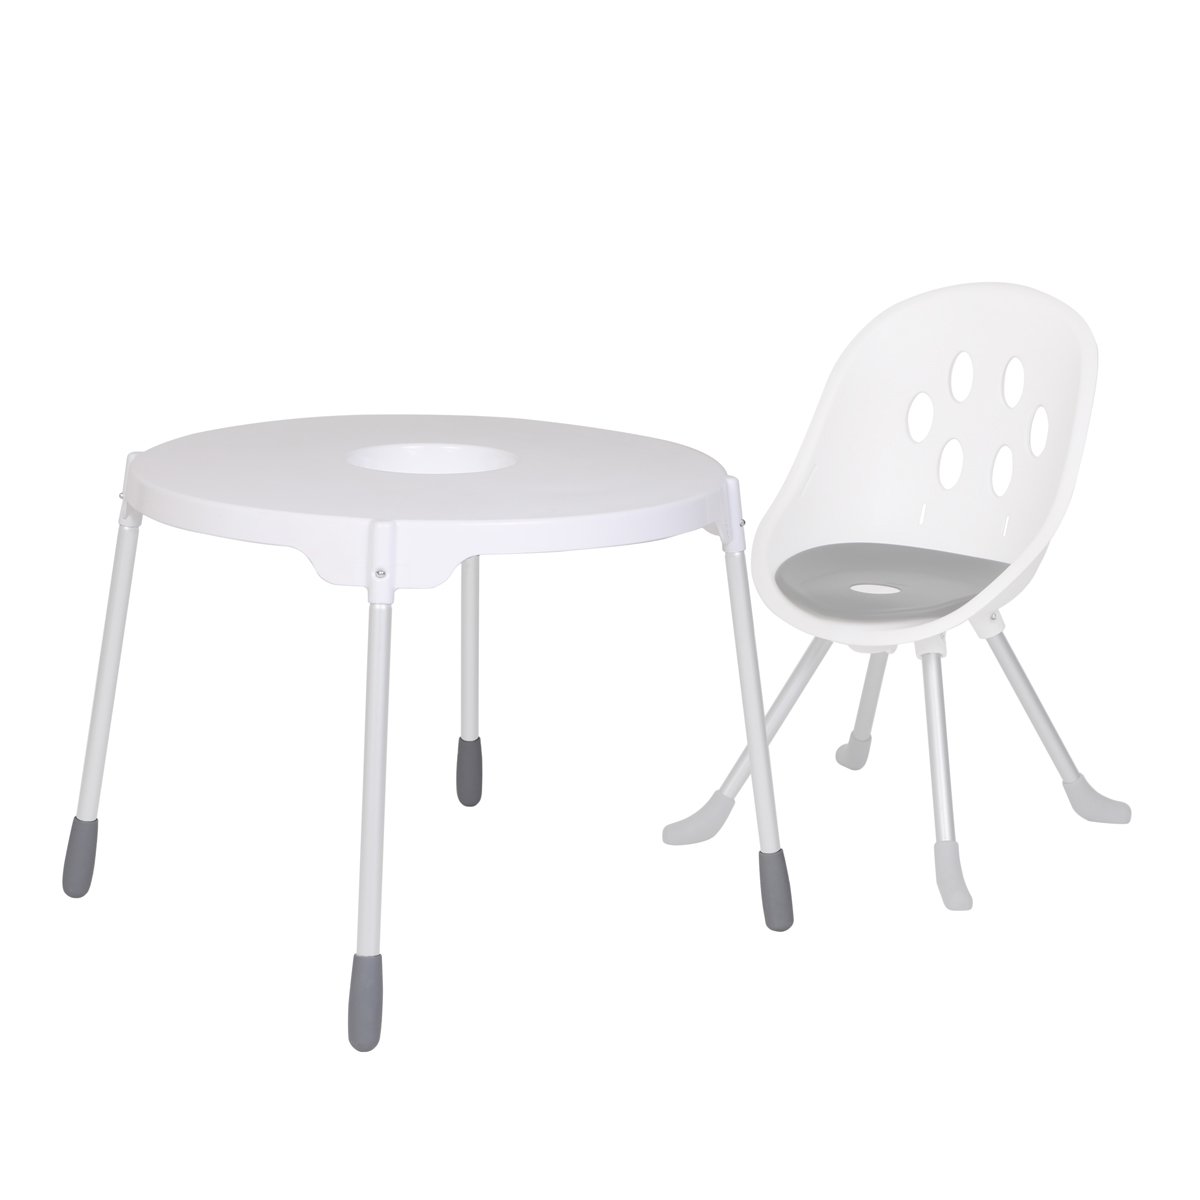 https://cdn.accentuate.io/4711297319017/19119322628201/phil_and_teds_poppy_table_top_with_leg_set_and_poppy_high_chair_1-v1630977923178.jpg?1200x1200